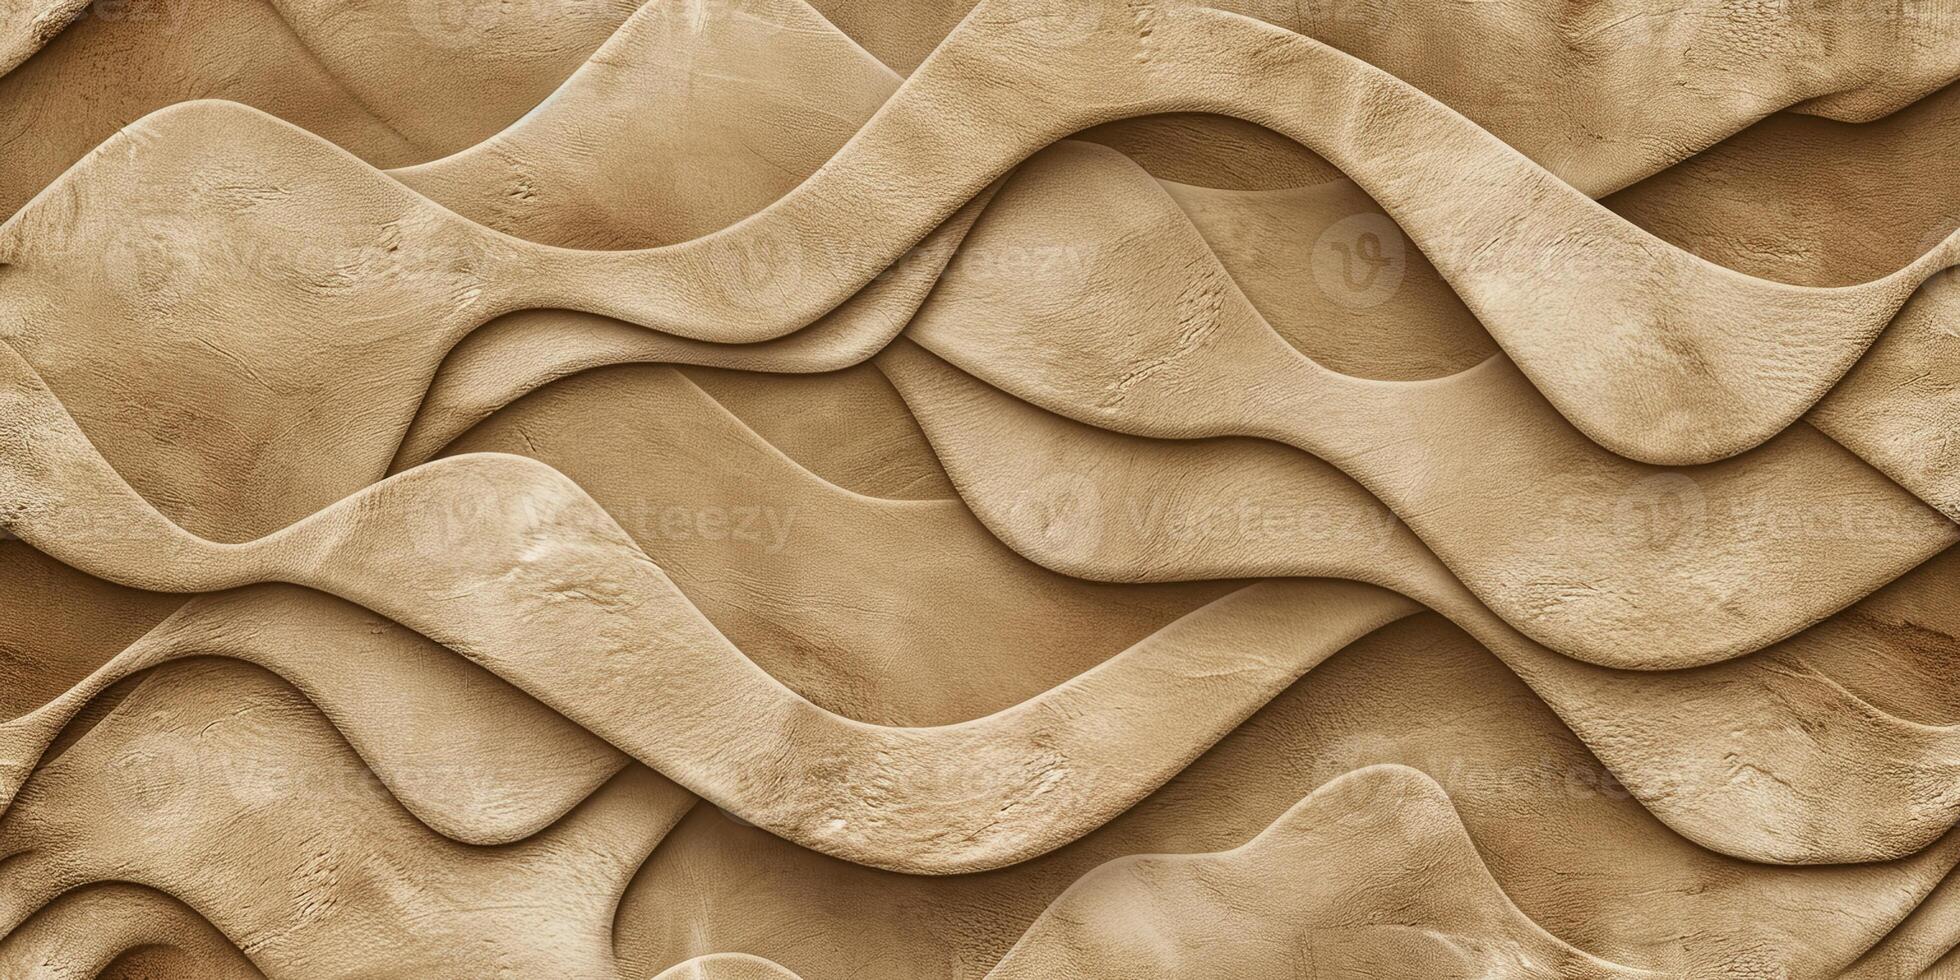 Luxurious suede leather pattern. Soft and smooth texture creates a fashionable backdrop AI Image photo